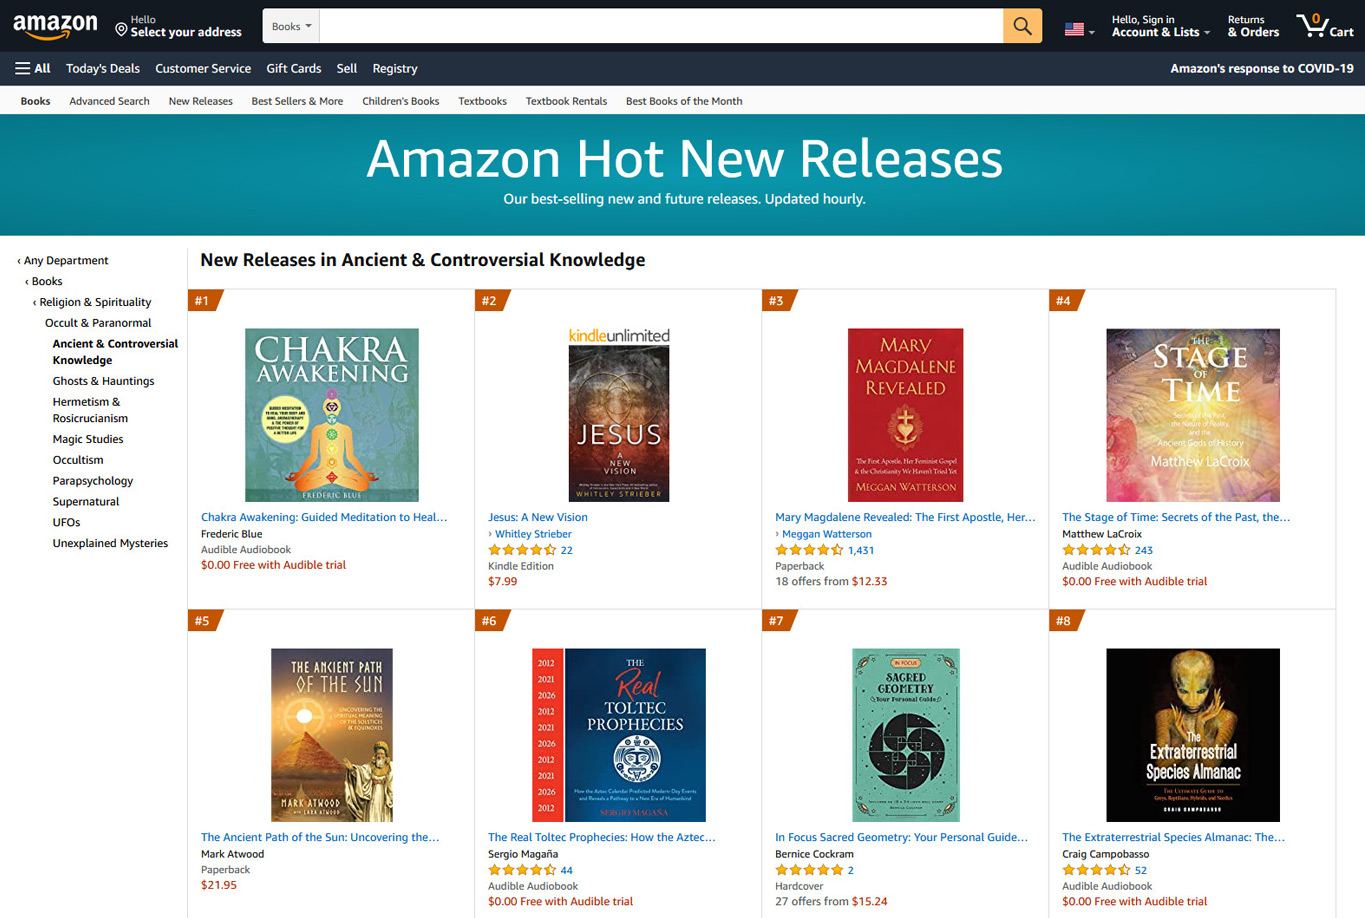 The Ancient Path of the Sun book in the Amazon Ancient and Controversial Knowledge bestseller list